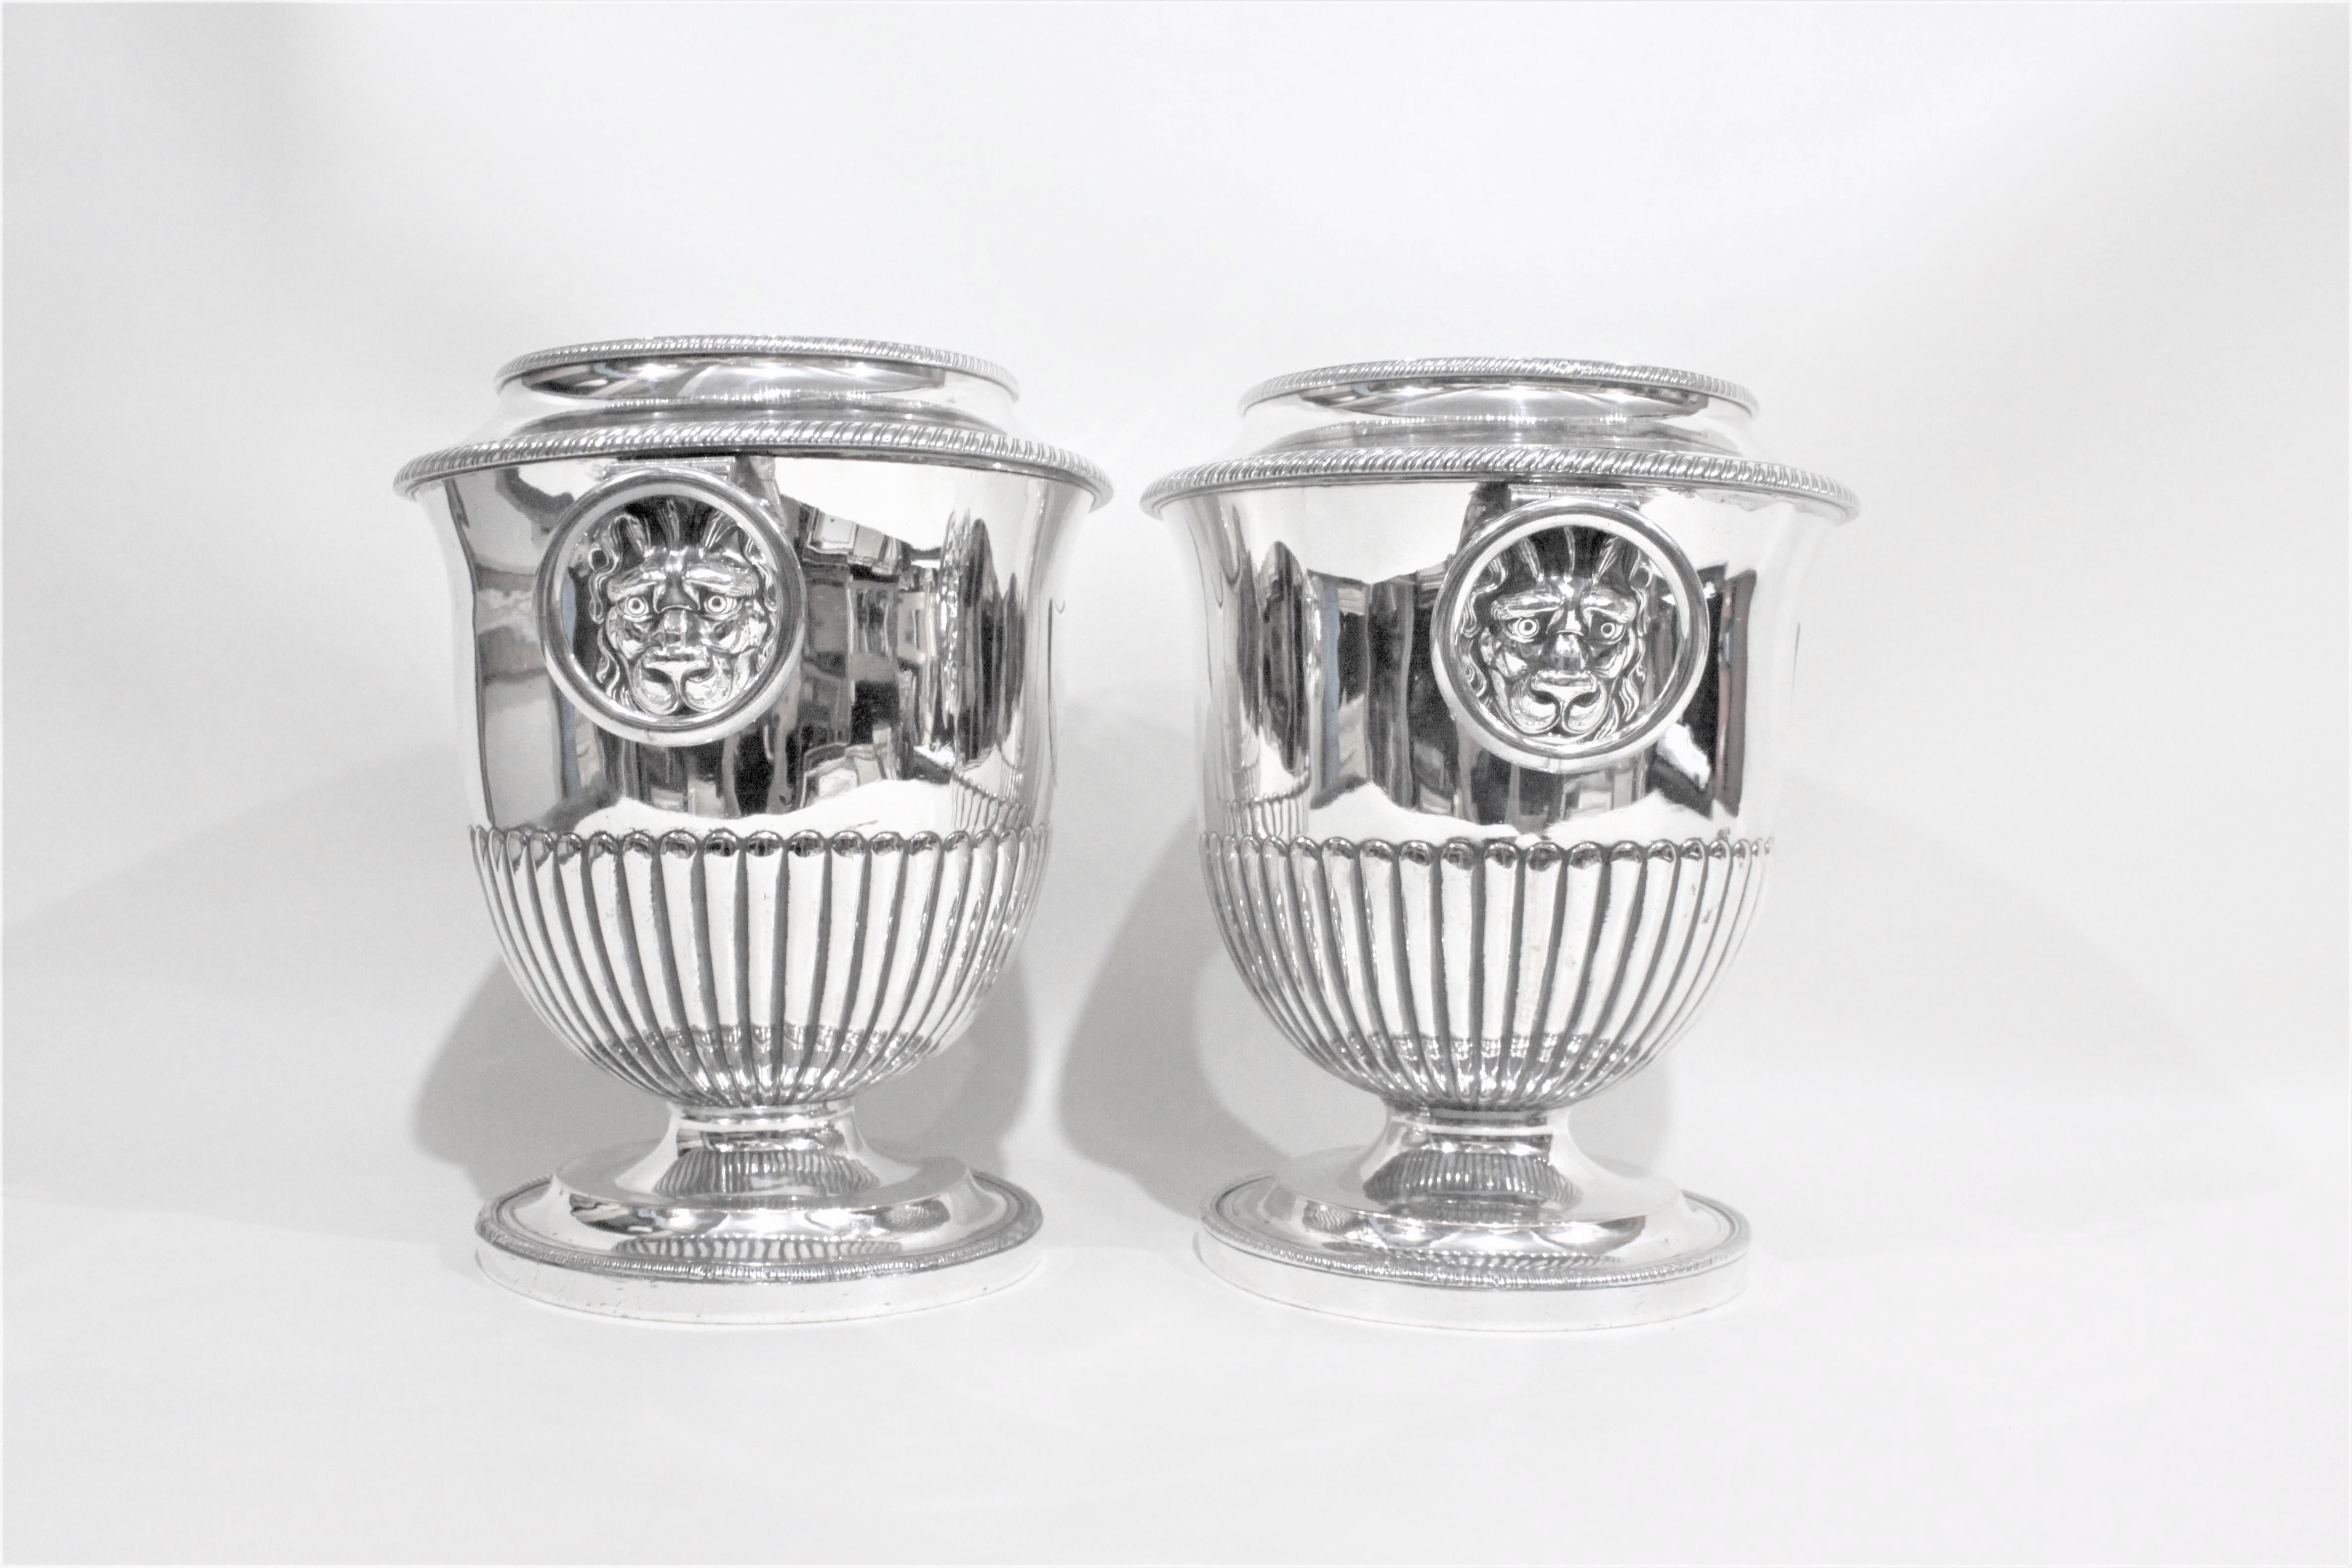 19th Century Pair of Antique Sheffield Regency Style Silver Plated Wine Coolers